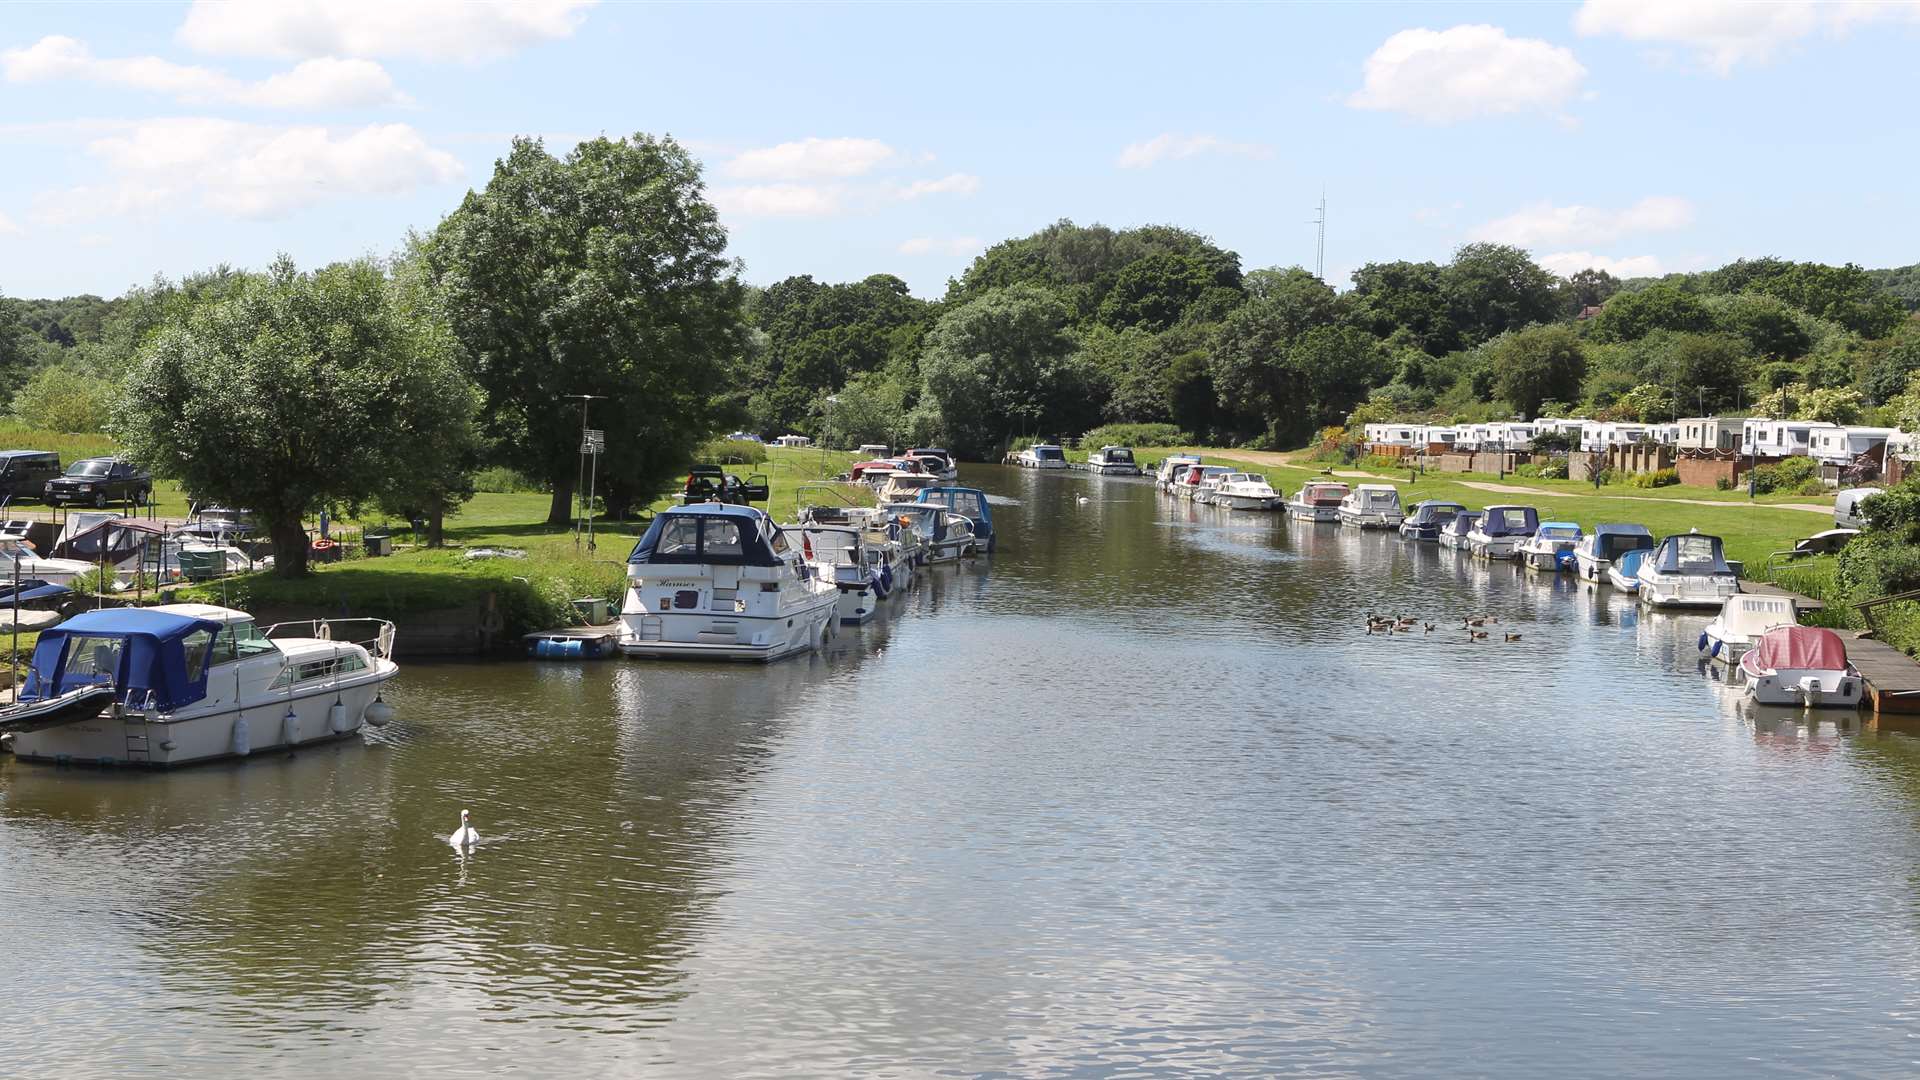 Firefighters were called to the Bow Bridge Marina in Wateringbury this afternoon